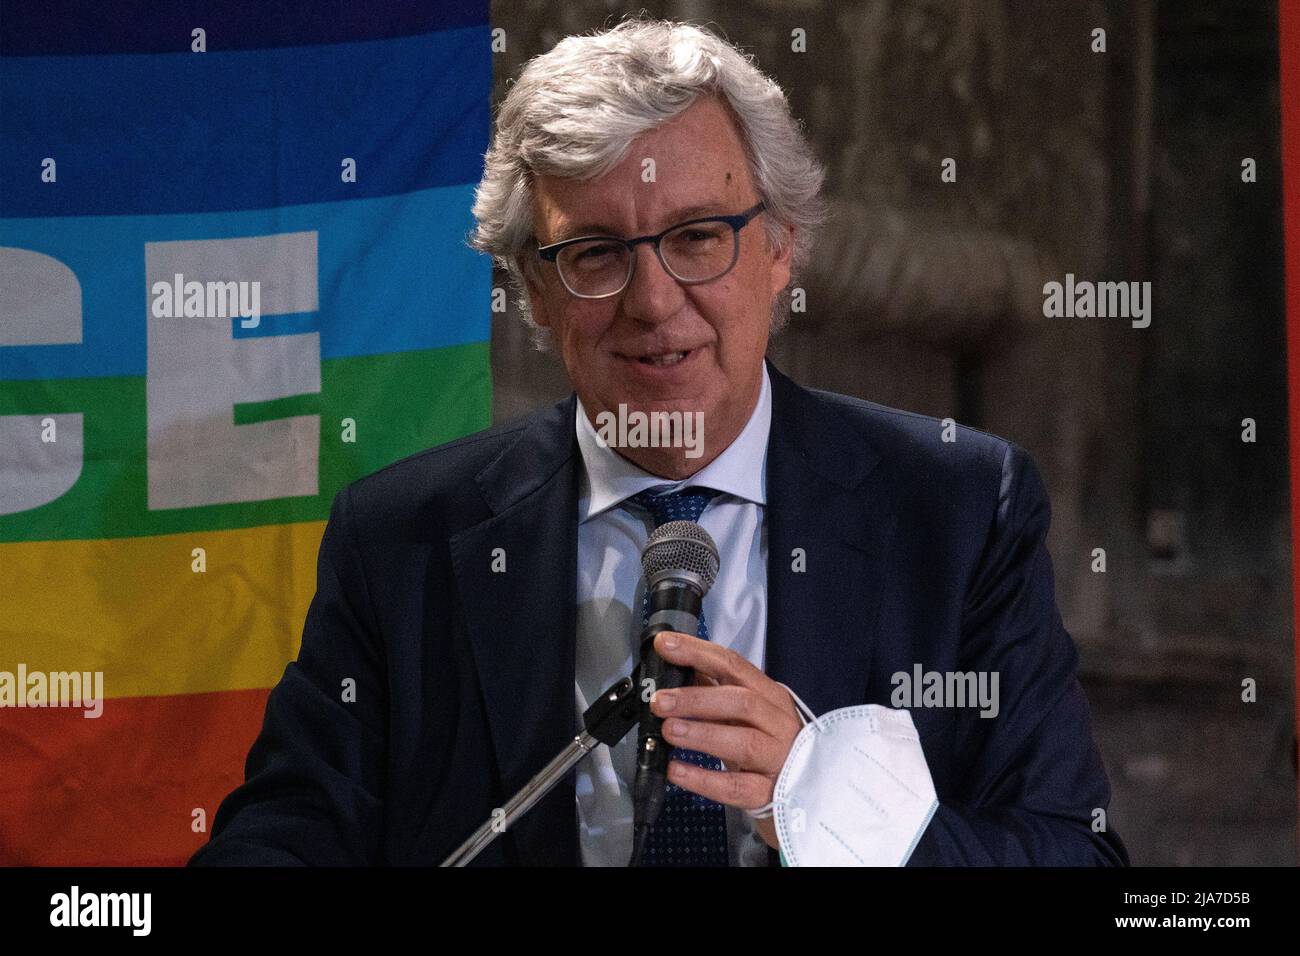 Naples, Italy. 27th May, 2022. Paolo Siani, member of the Chamber of Deputies and brother of Giancarlo Siani victim of the Camorra during his speech at the conference 'Naples free from the Camorra' held on May 27, 2022 at the Domus Ars Center for Music and Culture in Naples. Credit: Independent Photo Agency/Alamy Live News Stock Photo